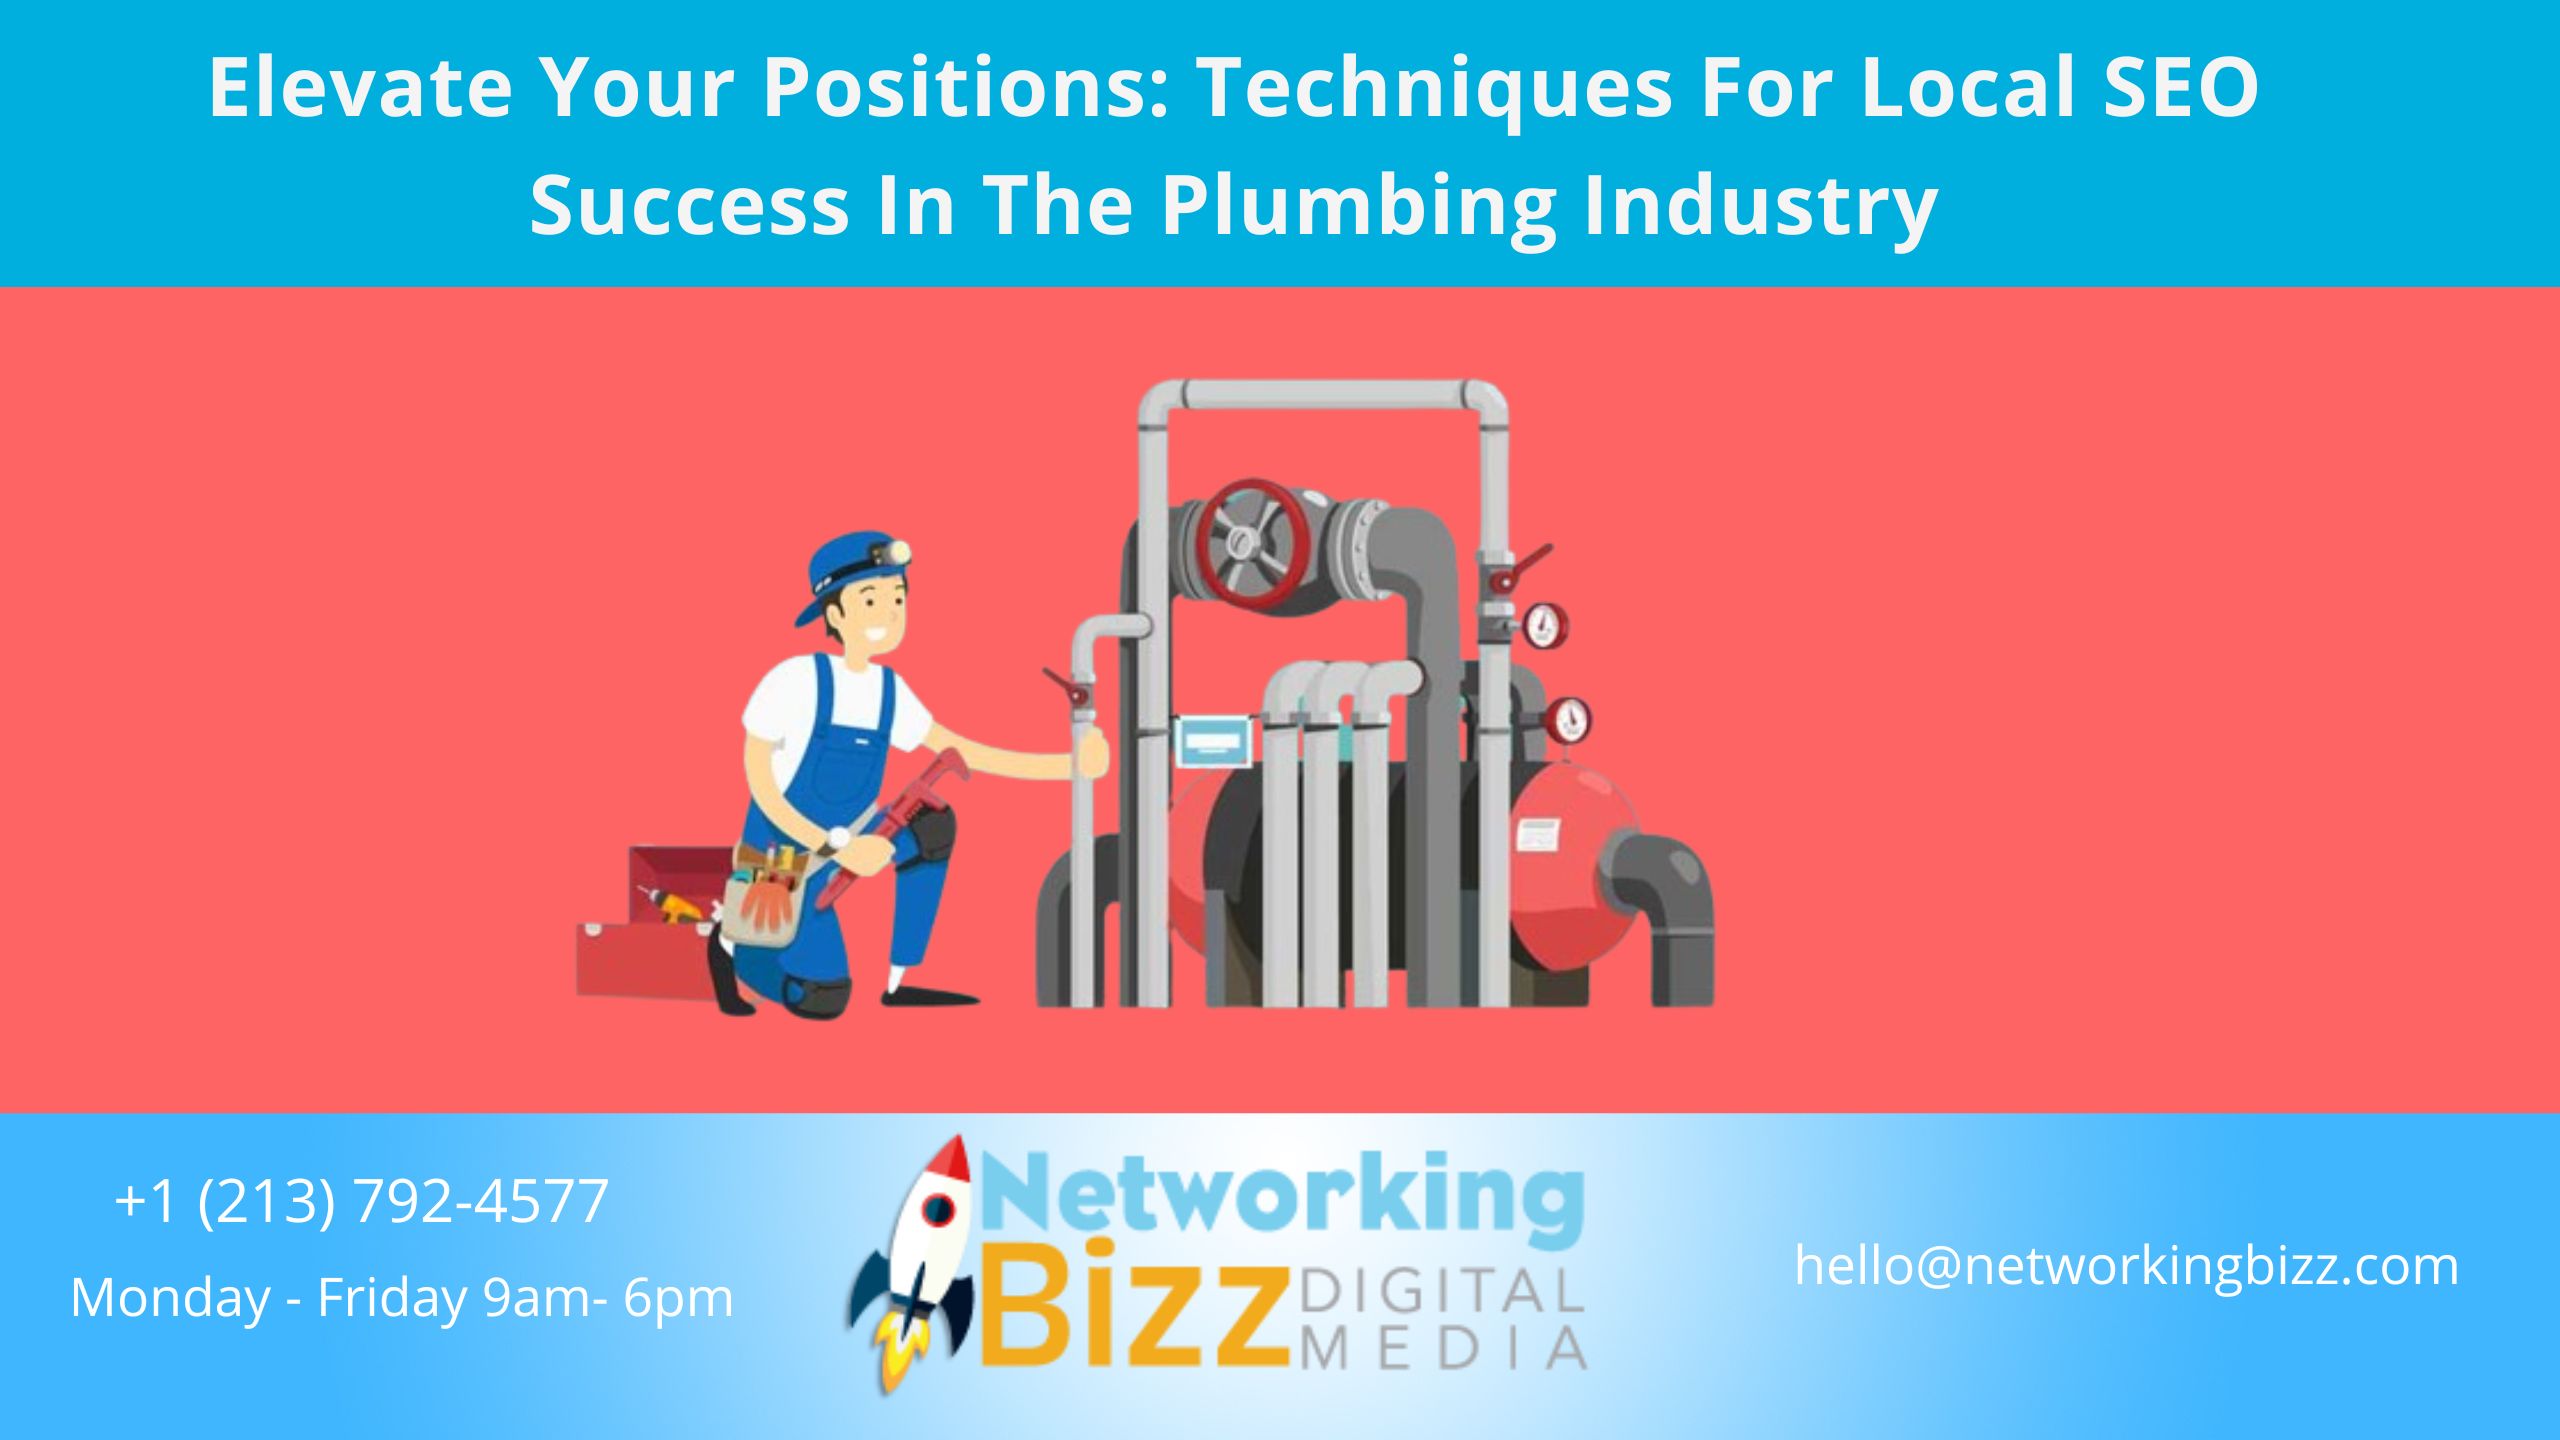 Elevate Your Positions: Techniques For Local SEO Success In The Plumbing Industry